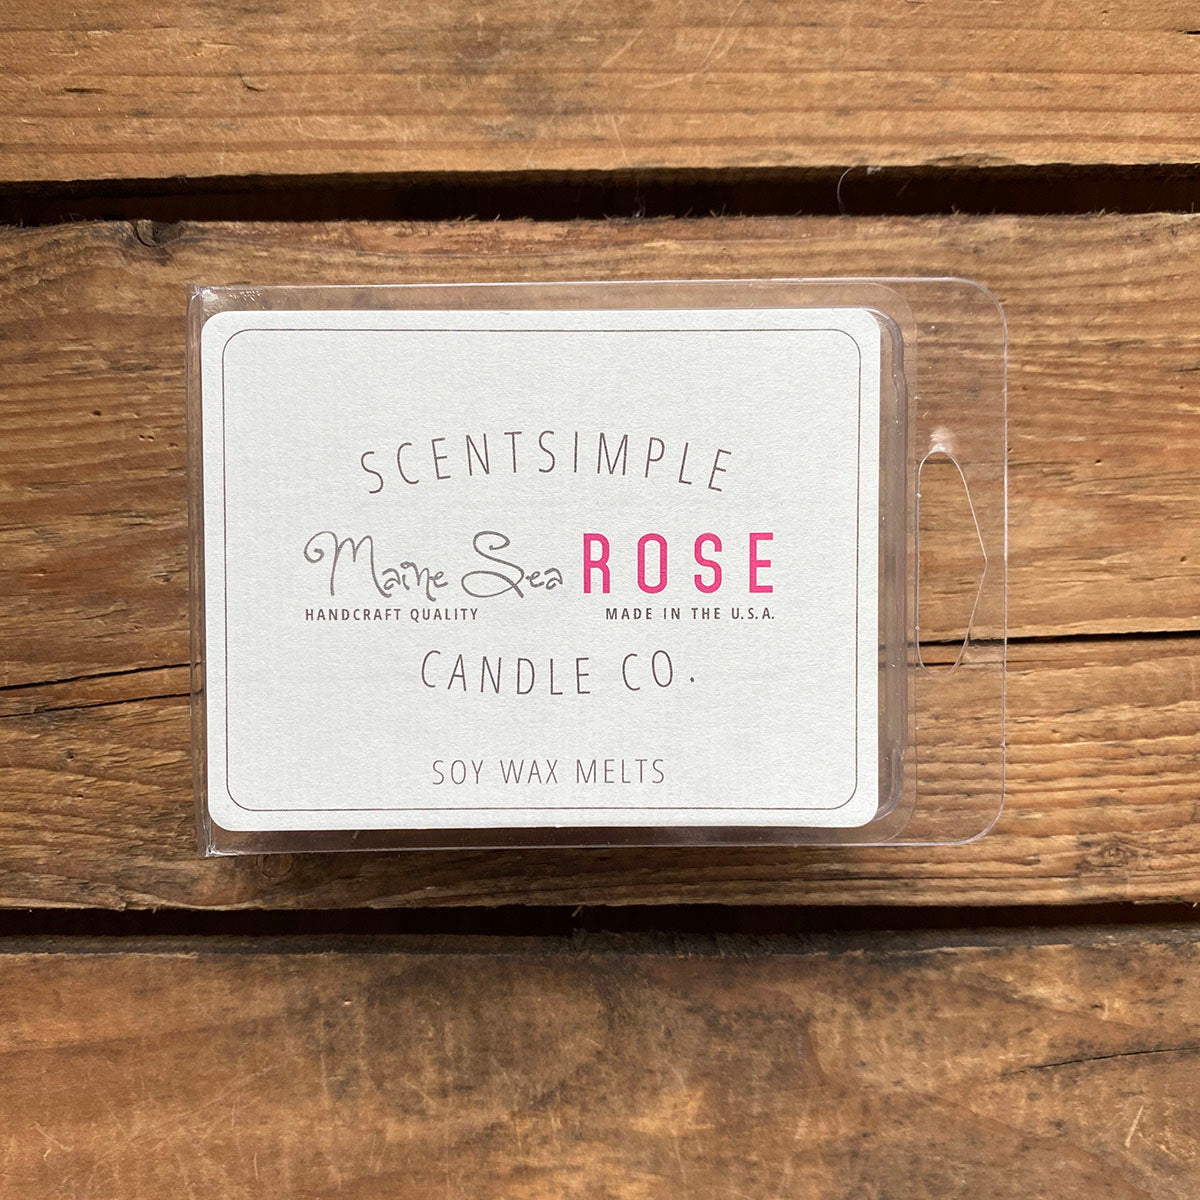 Maine Sea Rose Scented Soy Wax Melts